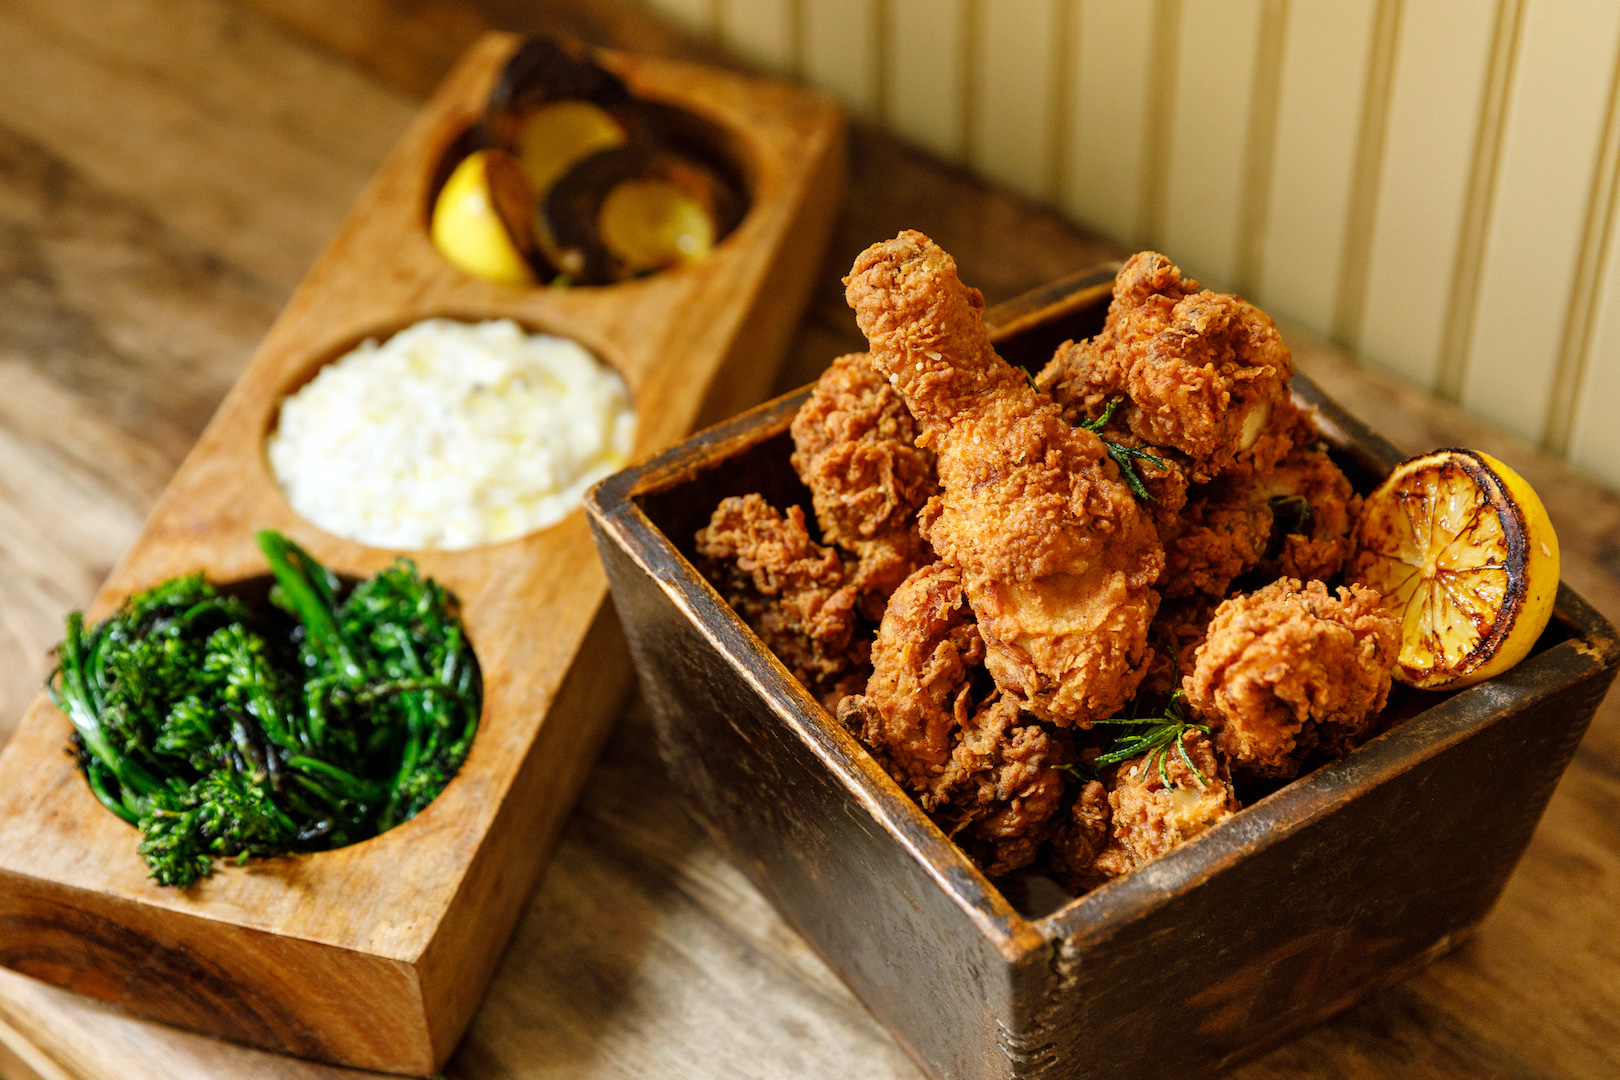 Town Hall’s fried chicken is consistently a highlight.